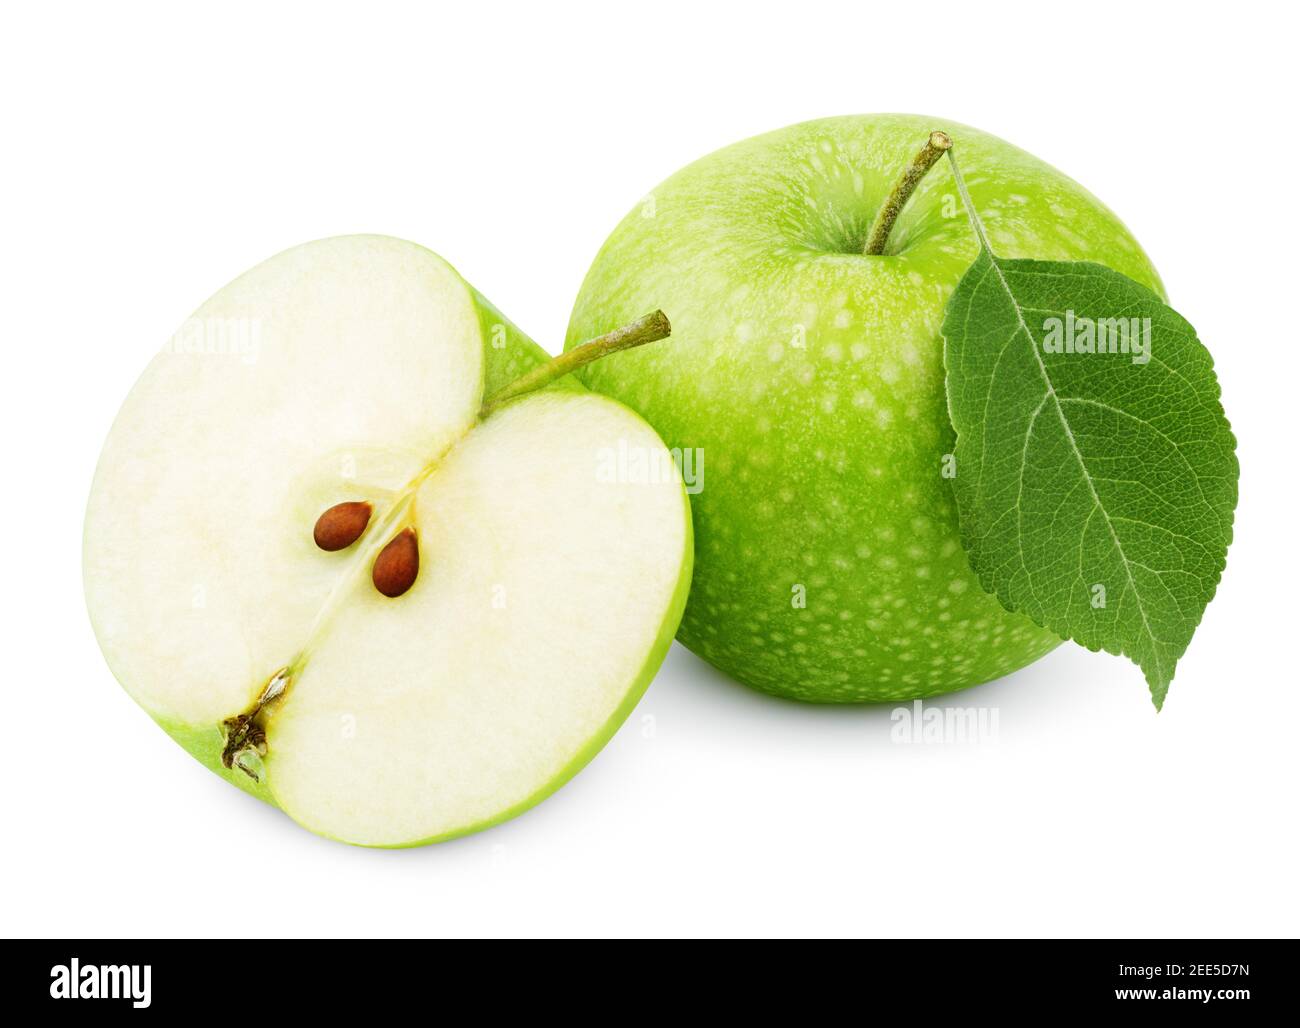 Whole ripe green apple with leaf and half isolated on white background with clipping path Stock Photo